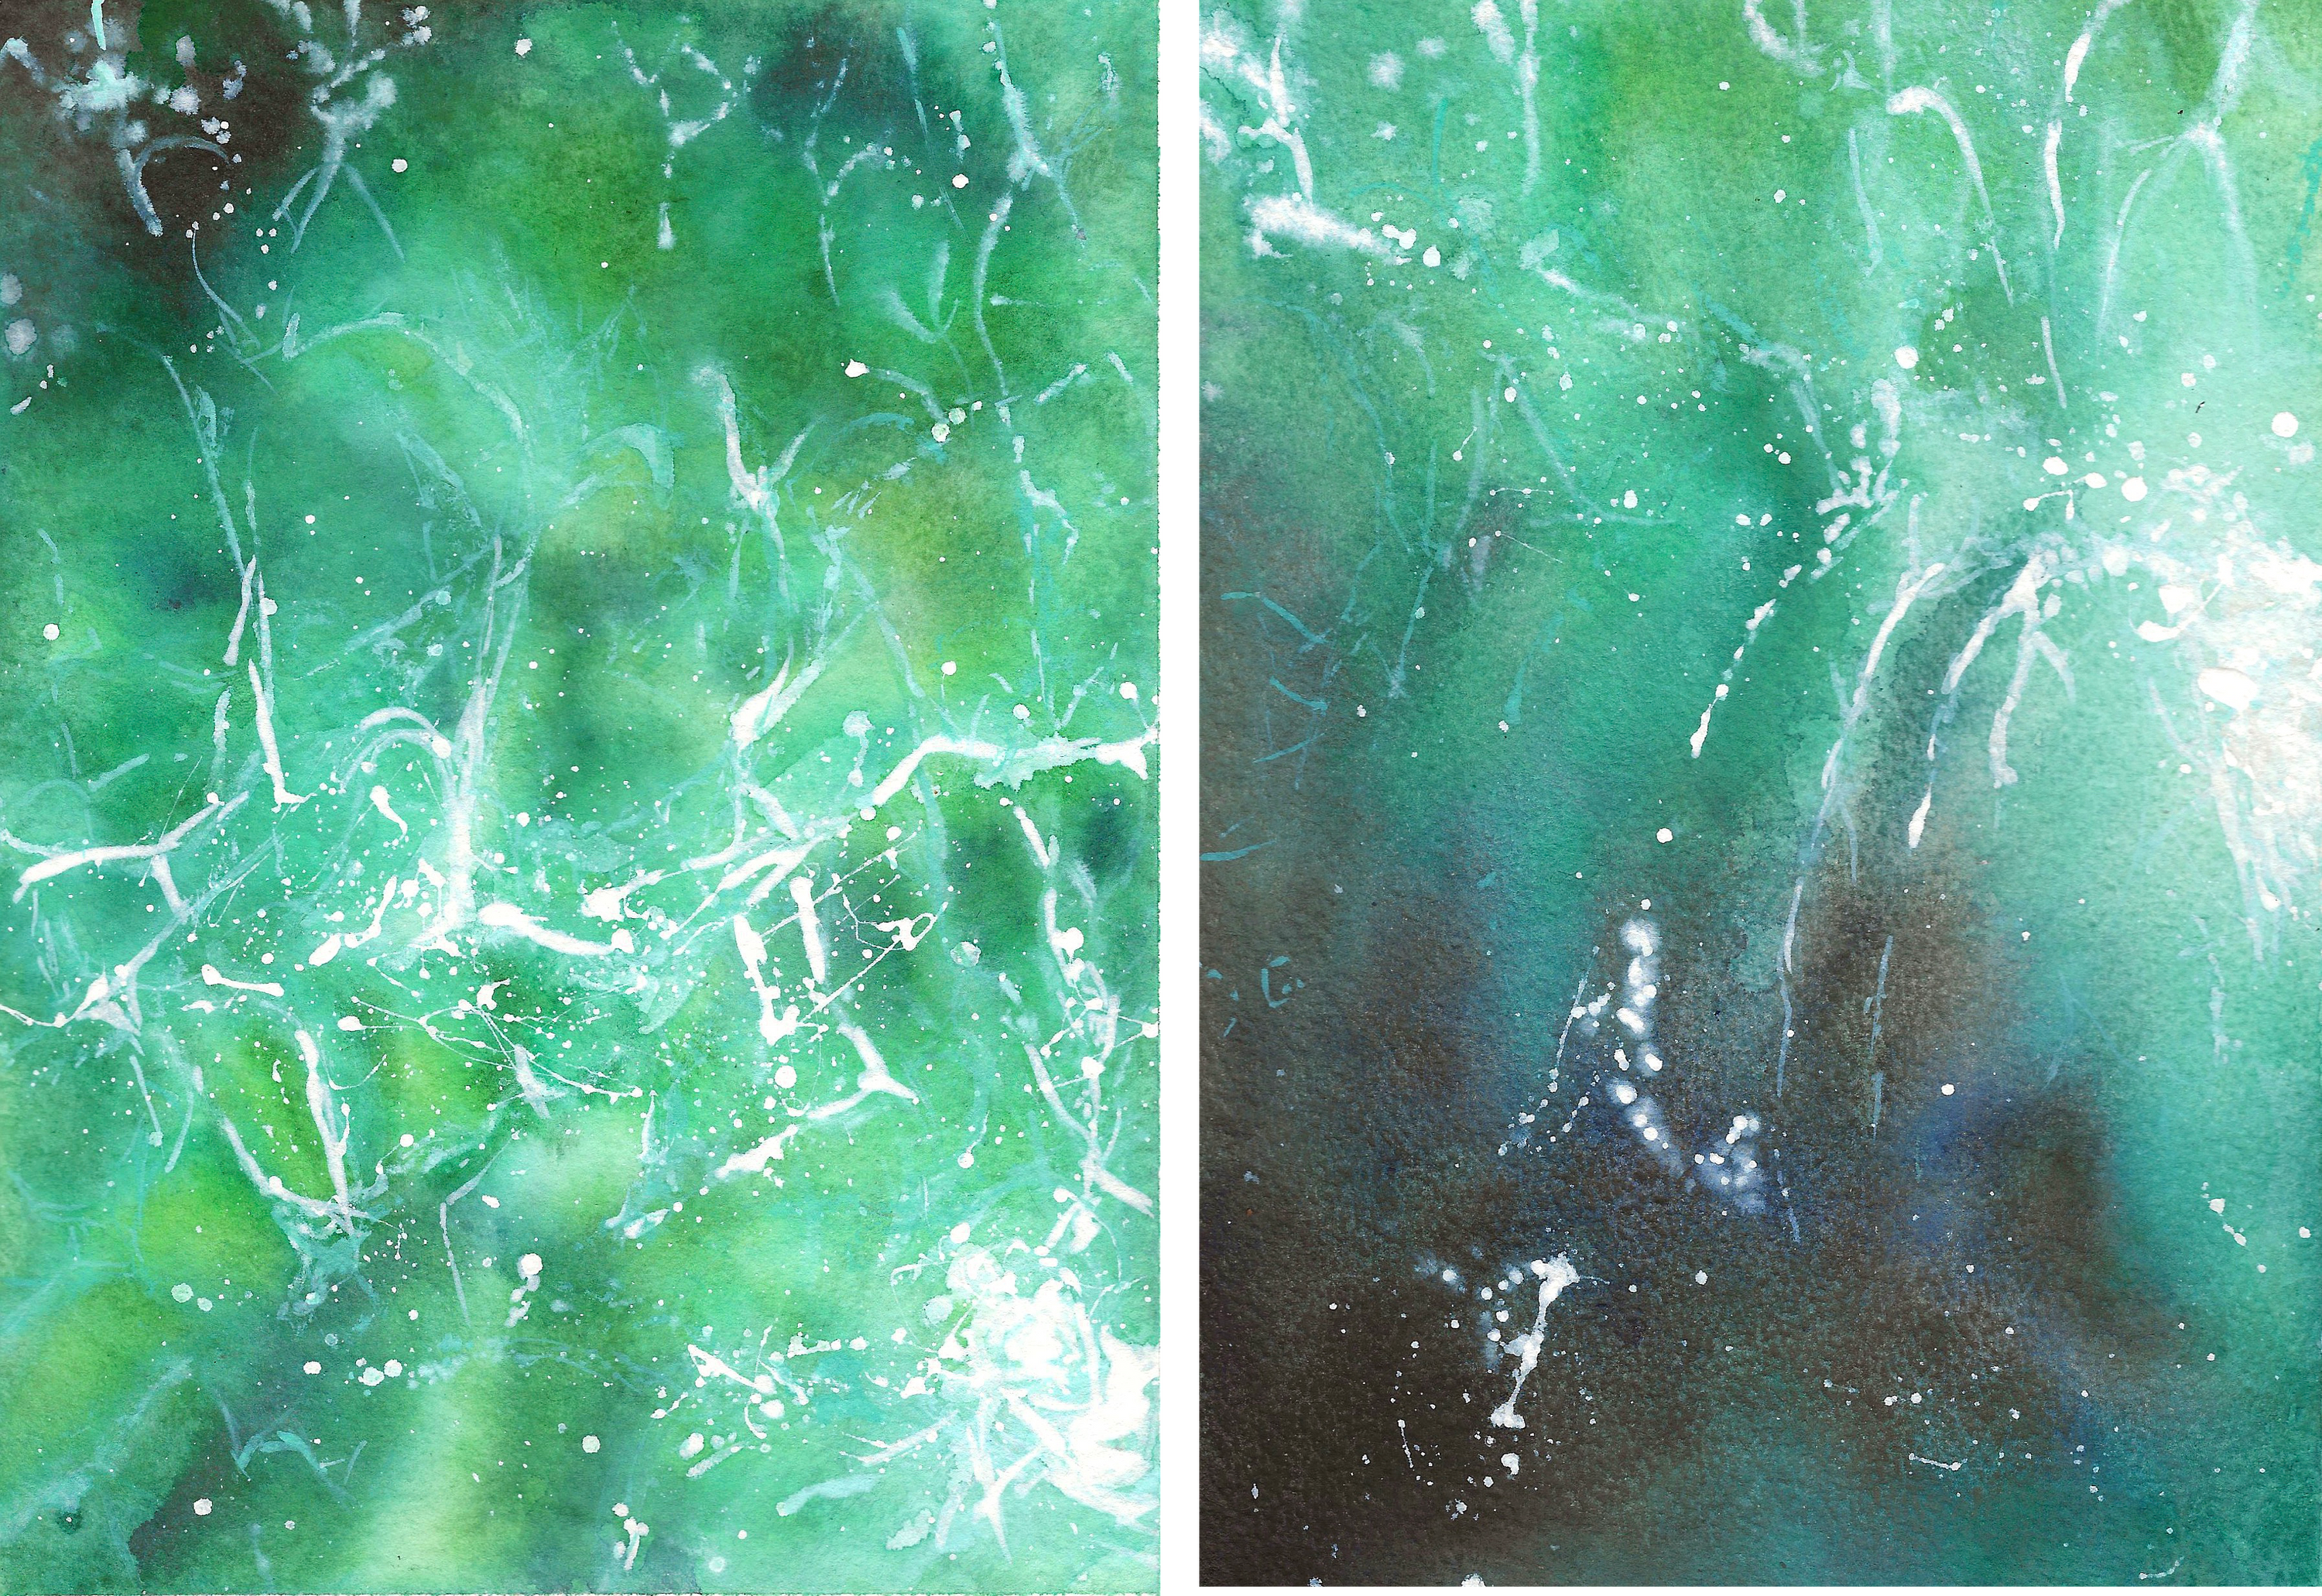 diptych bc ferries sequence 2 -  #3 #4 - watercolour and gouache - 148 x 210mm ish - 640gsm 300lbs